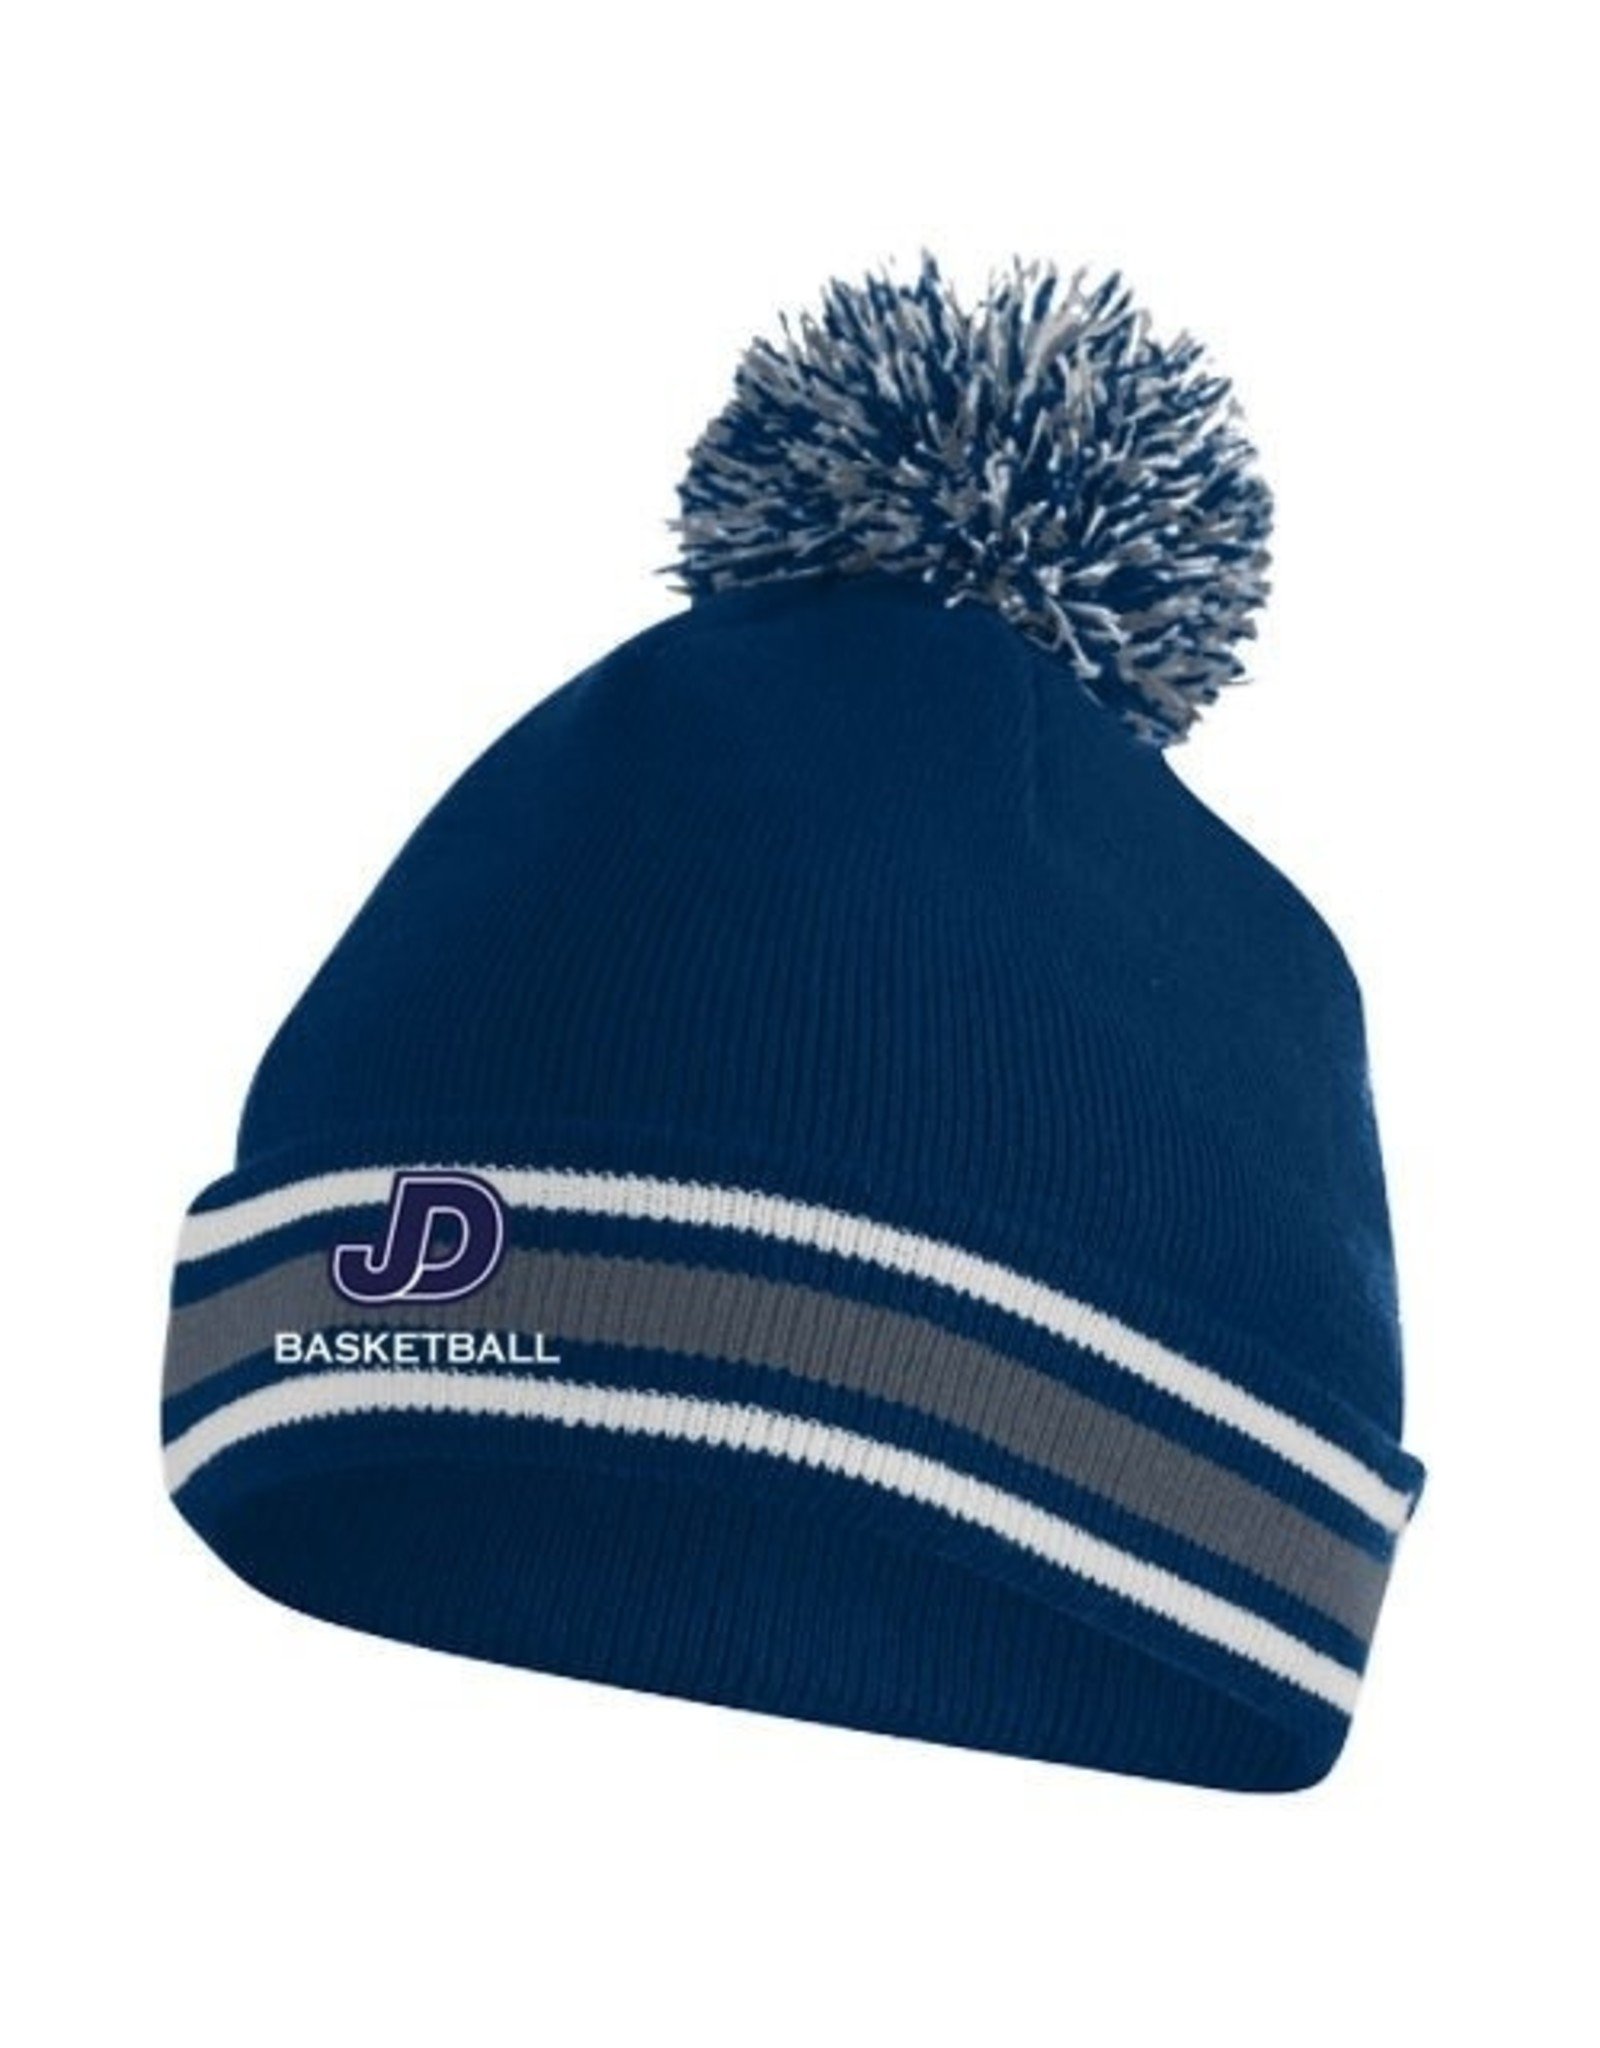 NON-UNIFORM Embroidered Knit Hat in navy, white and grey with JD Basketball embroidered